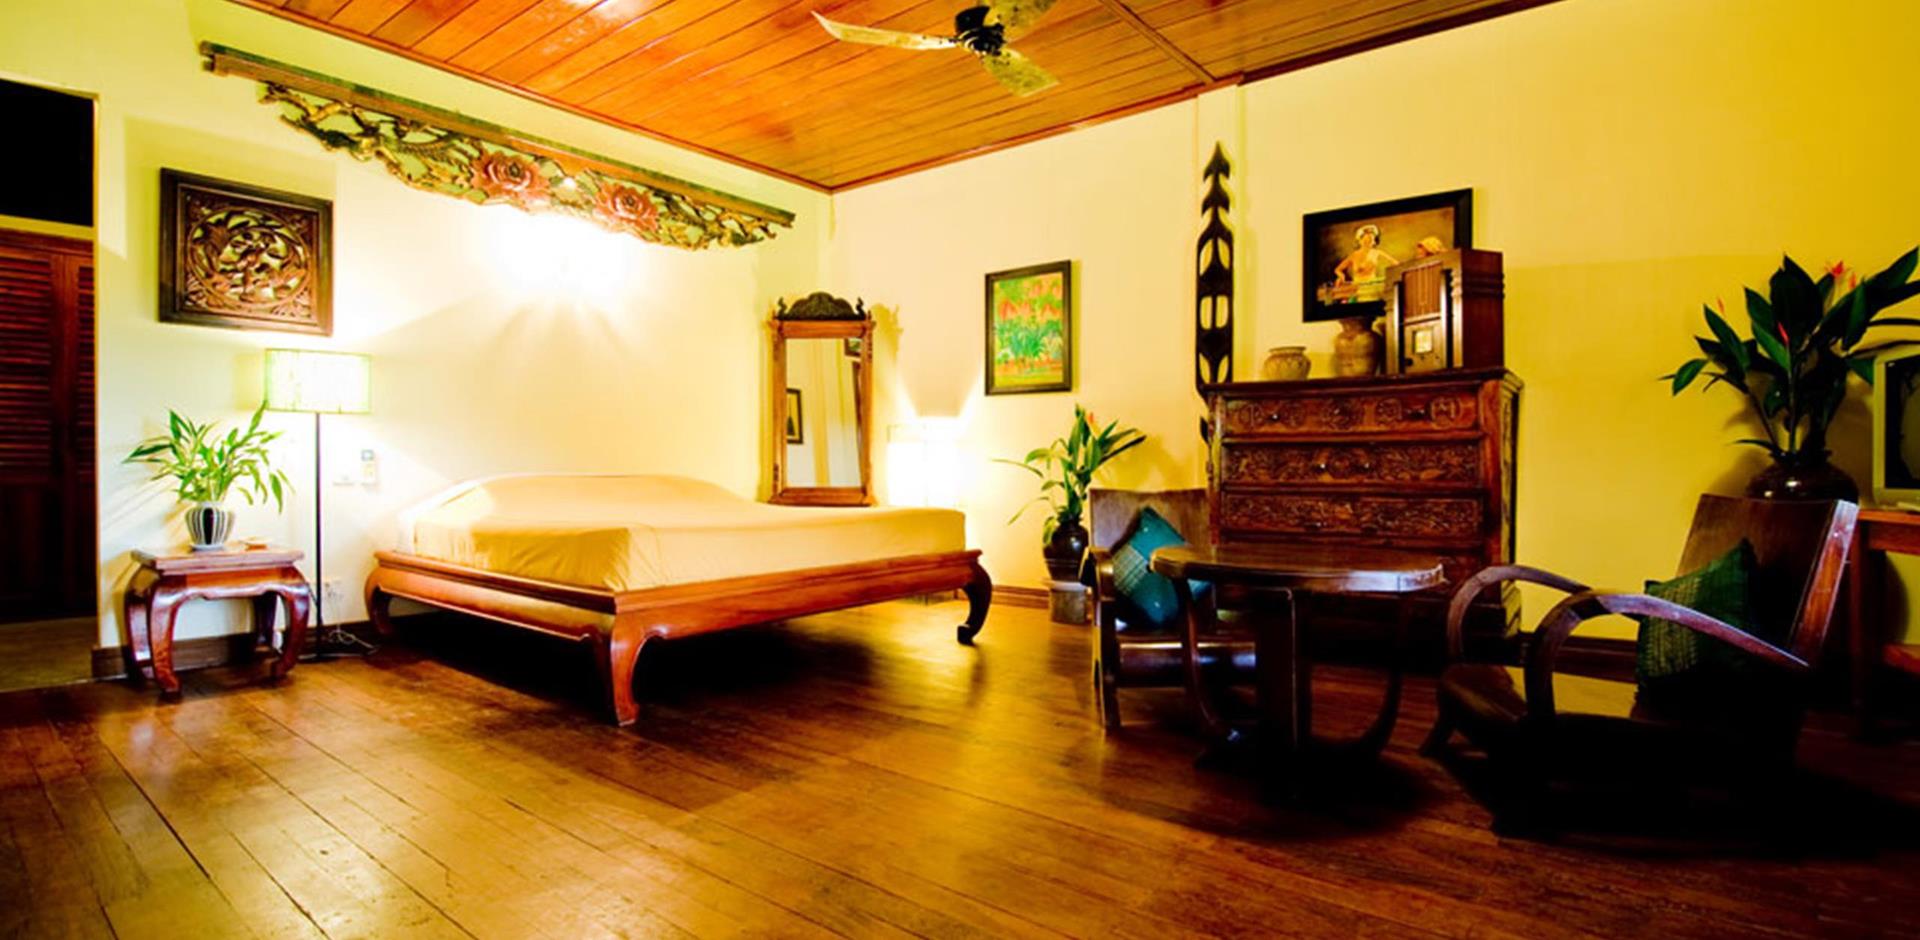 Bedroom, Terres Rouges Lodge, Cambodia, A&K